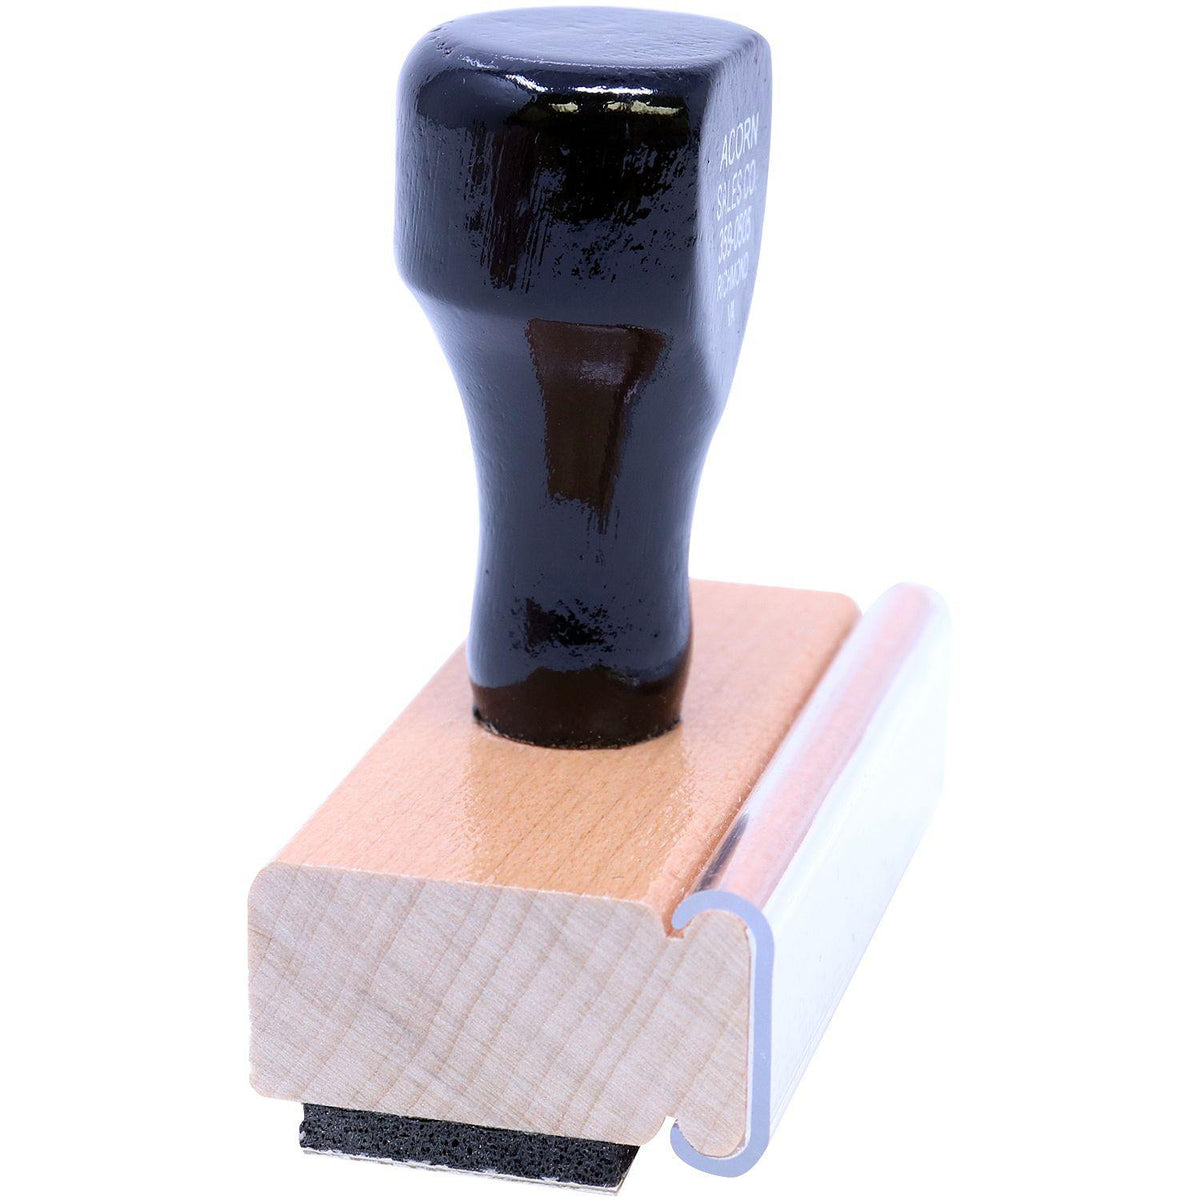 Side View of Large Refinance Rubber Stamp at an Angle